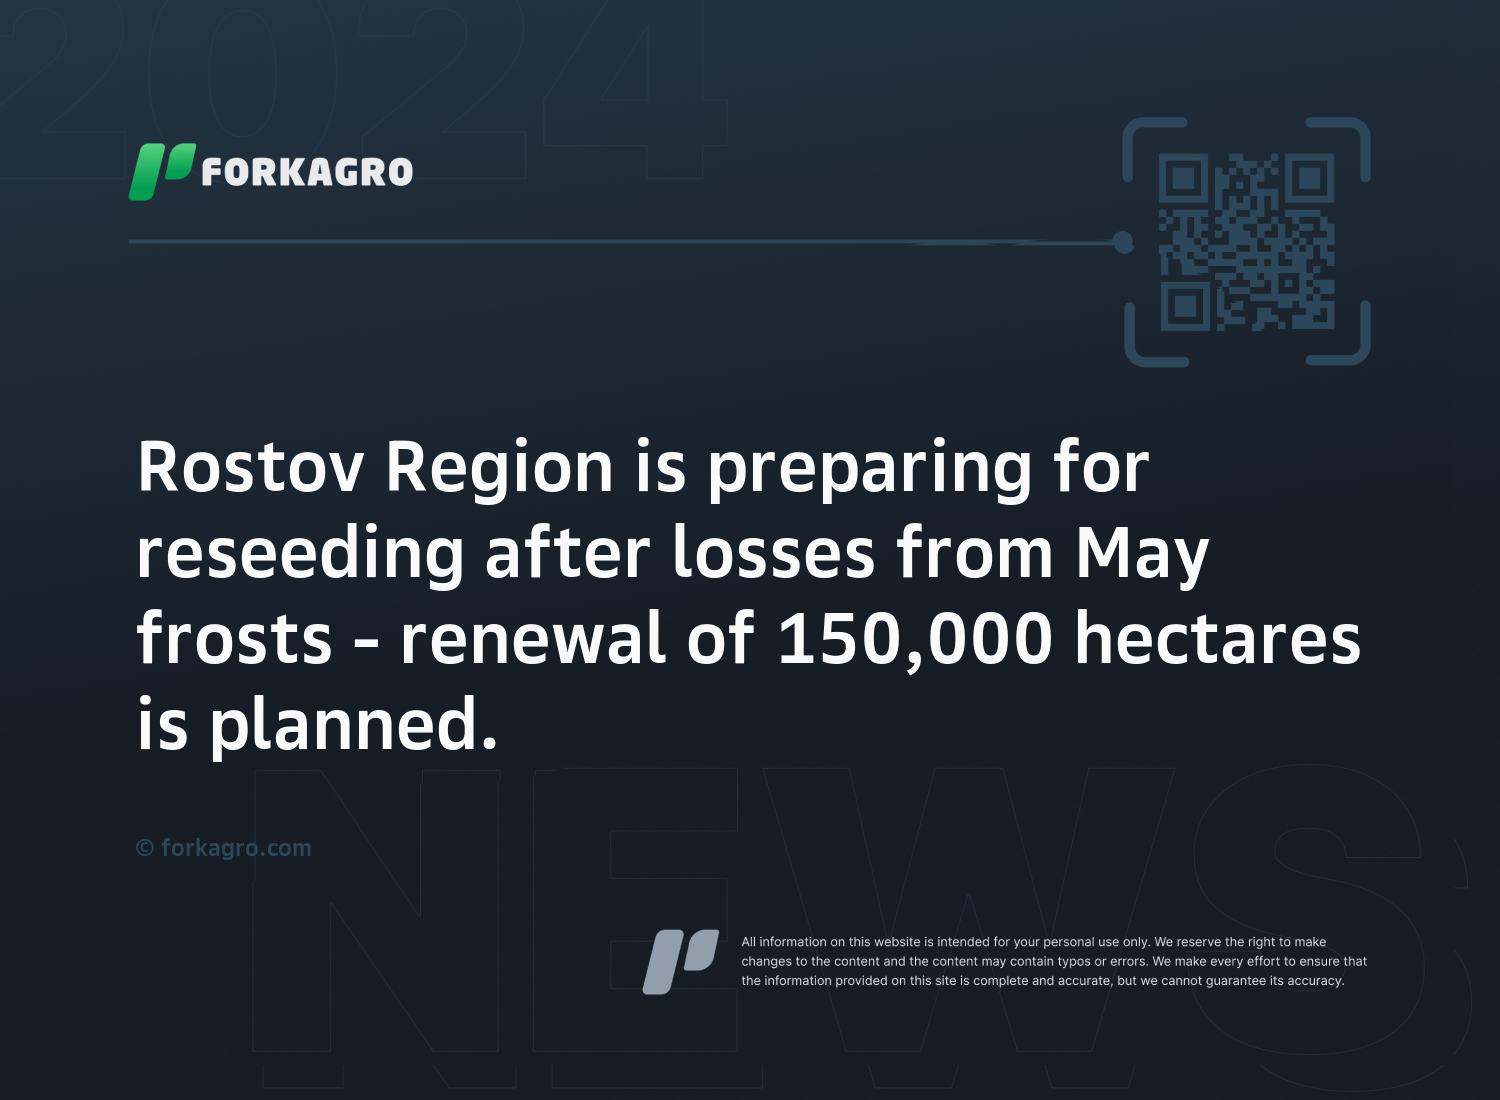 Rostov Region is preparing for reseeding after losses from May frosts - renewal of 150,000 hectares is planned.